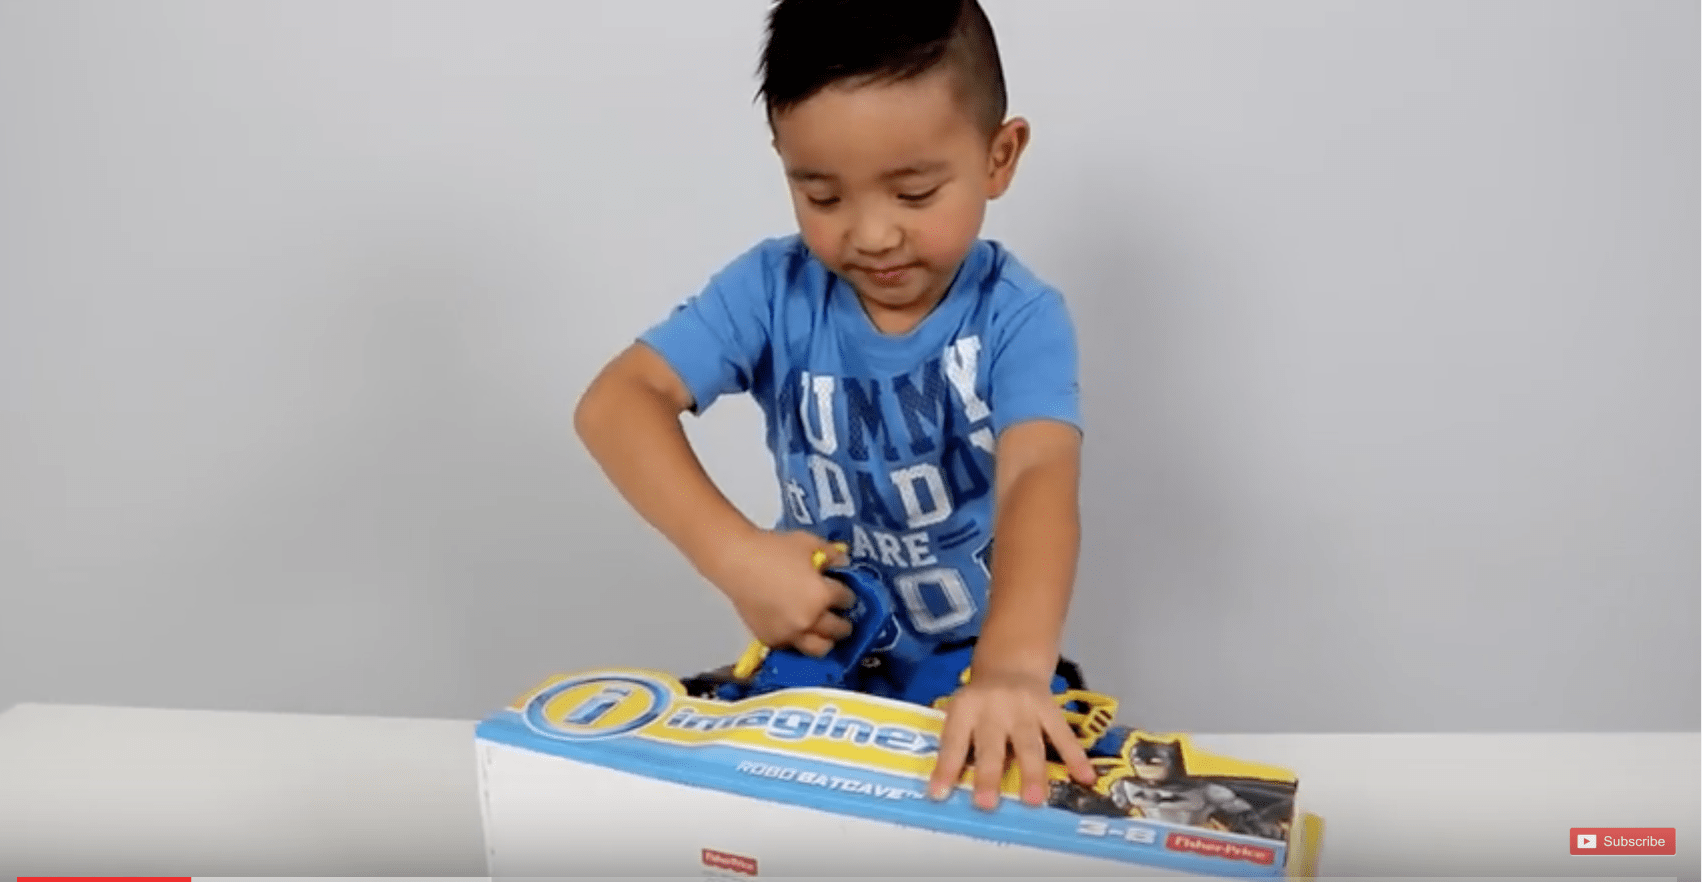 Why kids love unboxing videos